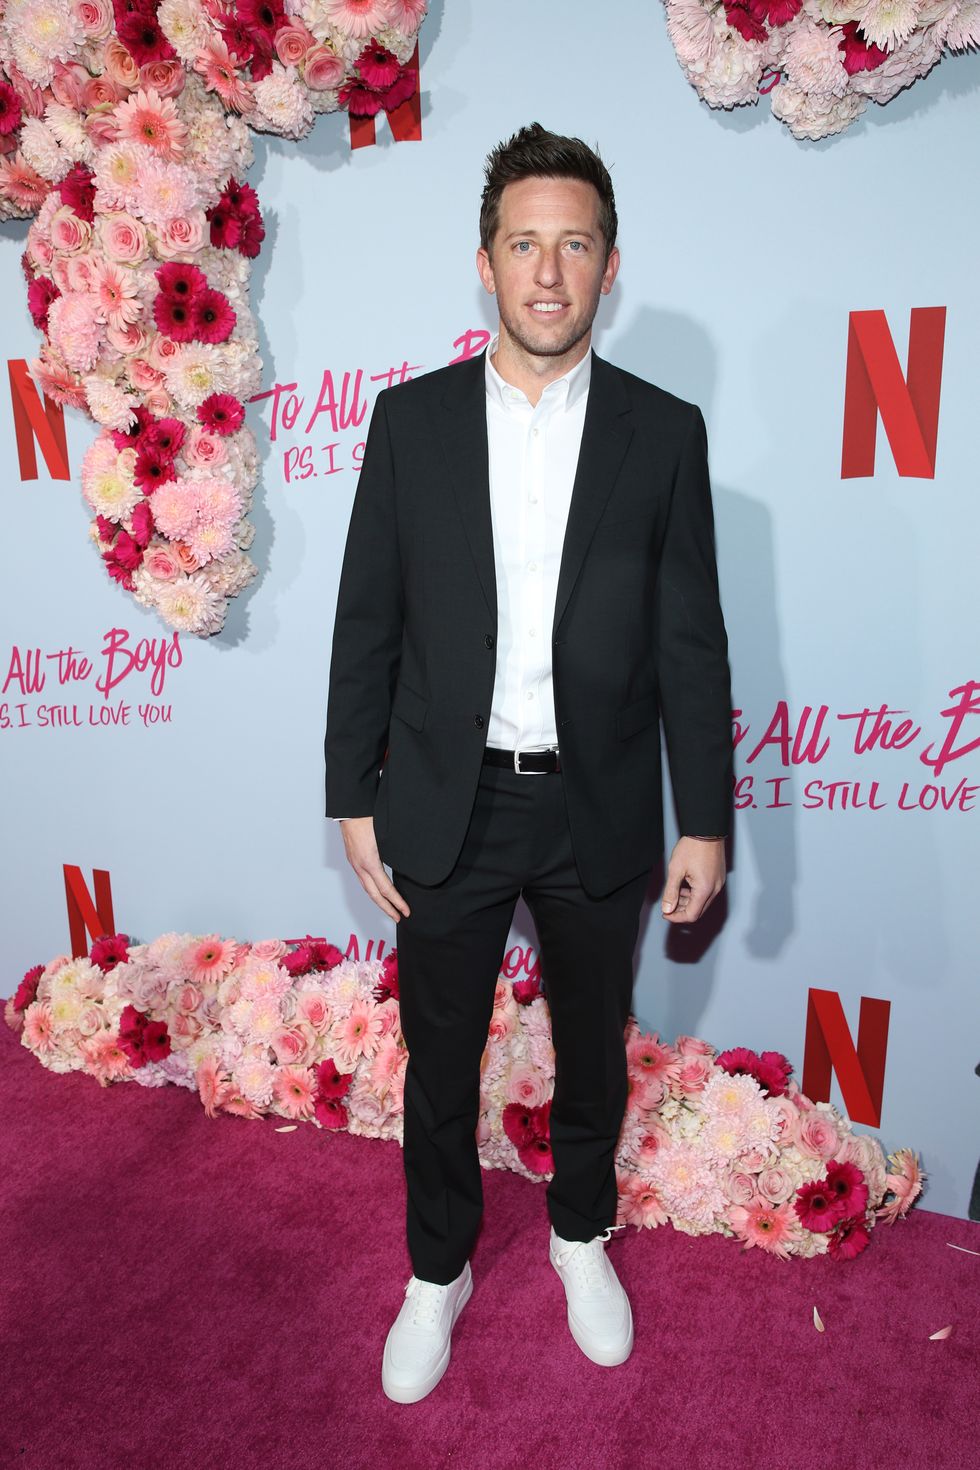 premiere of netflix's quotto all the boys ps i still love you quot red carpet